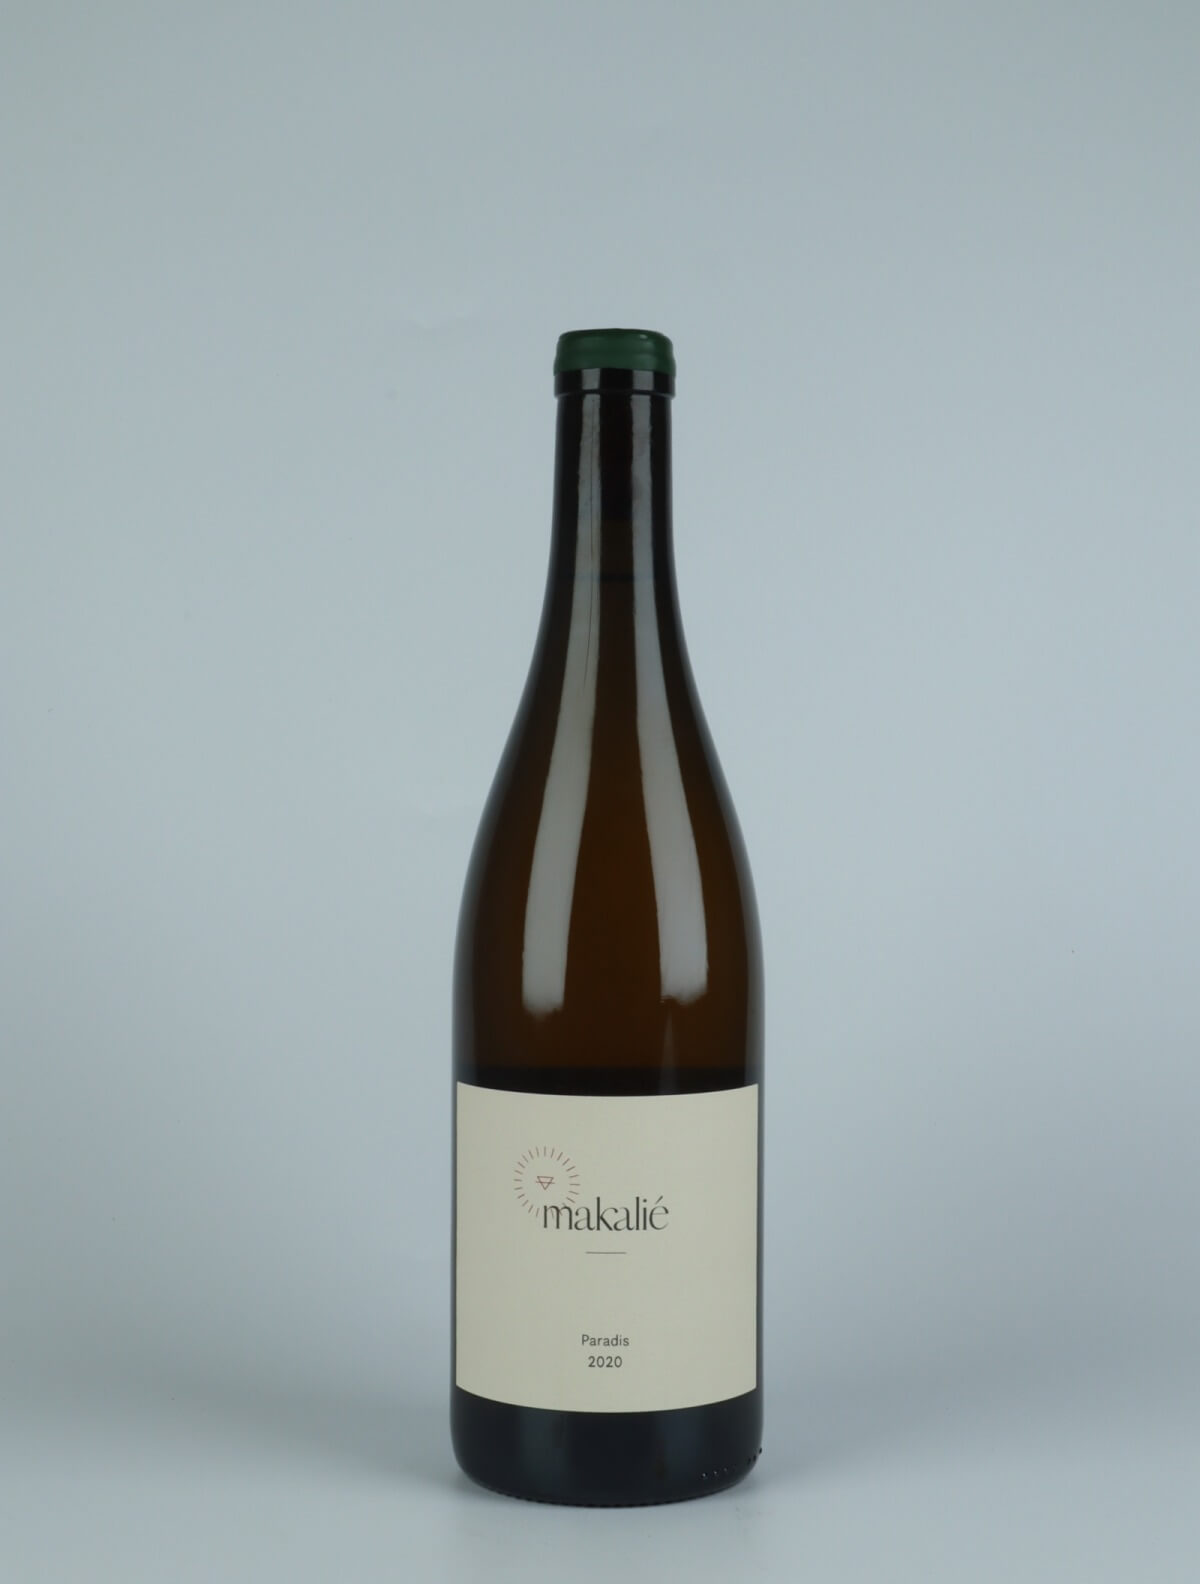 A bottle 2020 Paradis White wine from Makalié, Baden in Germany